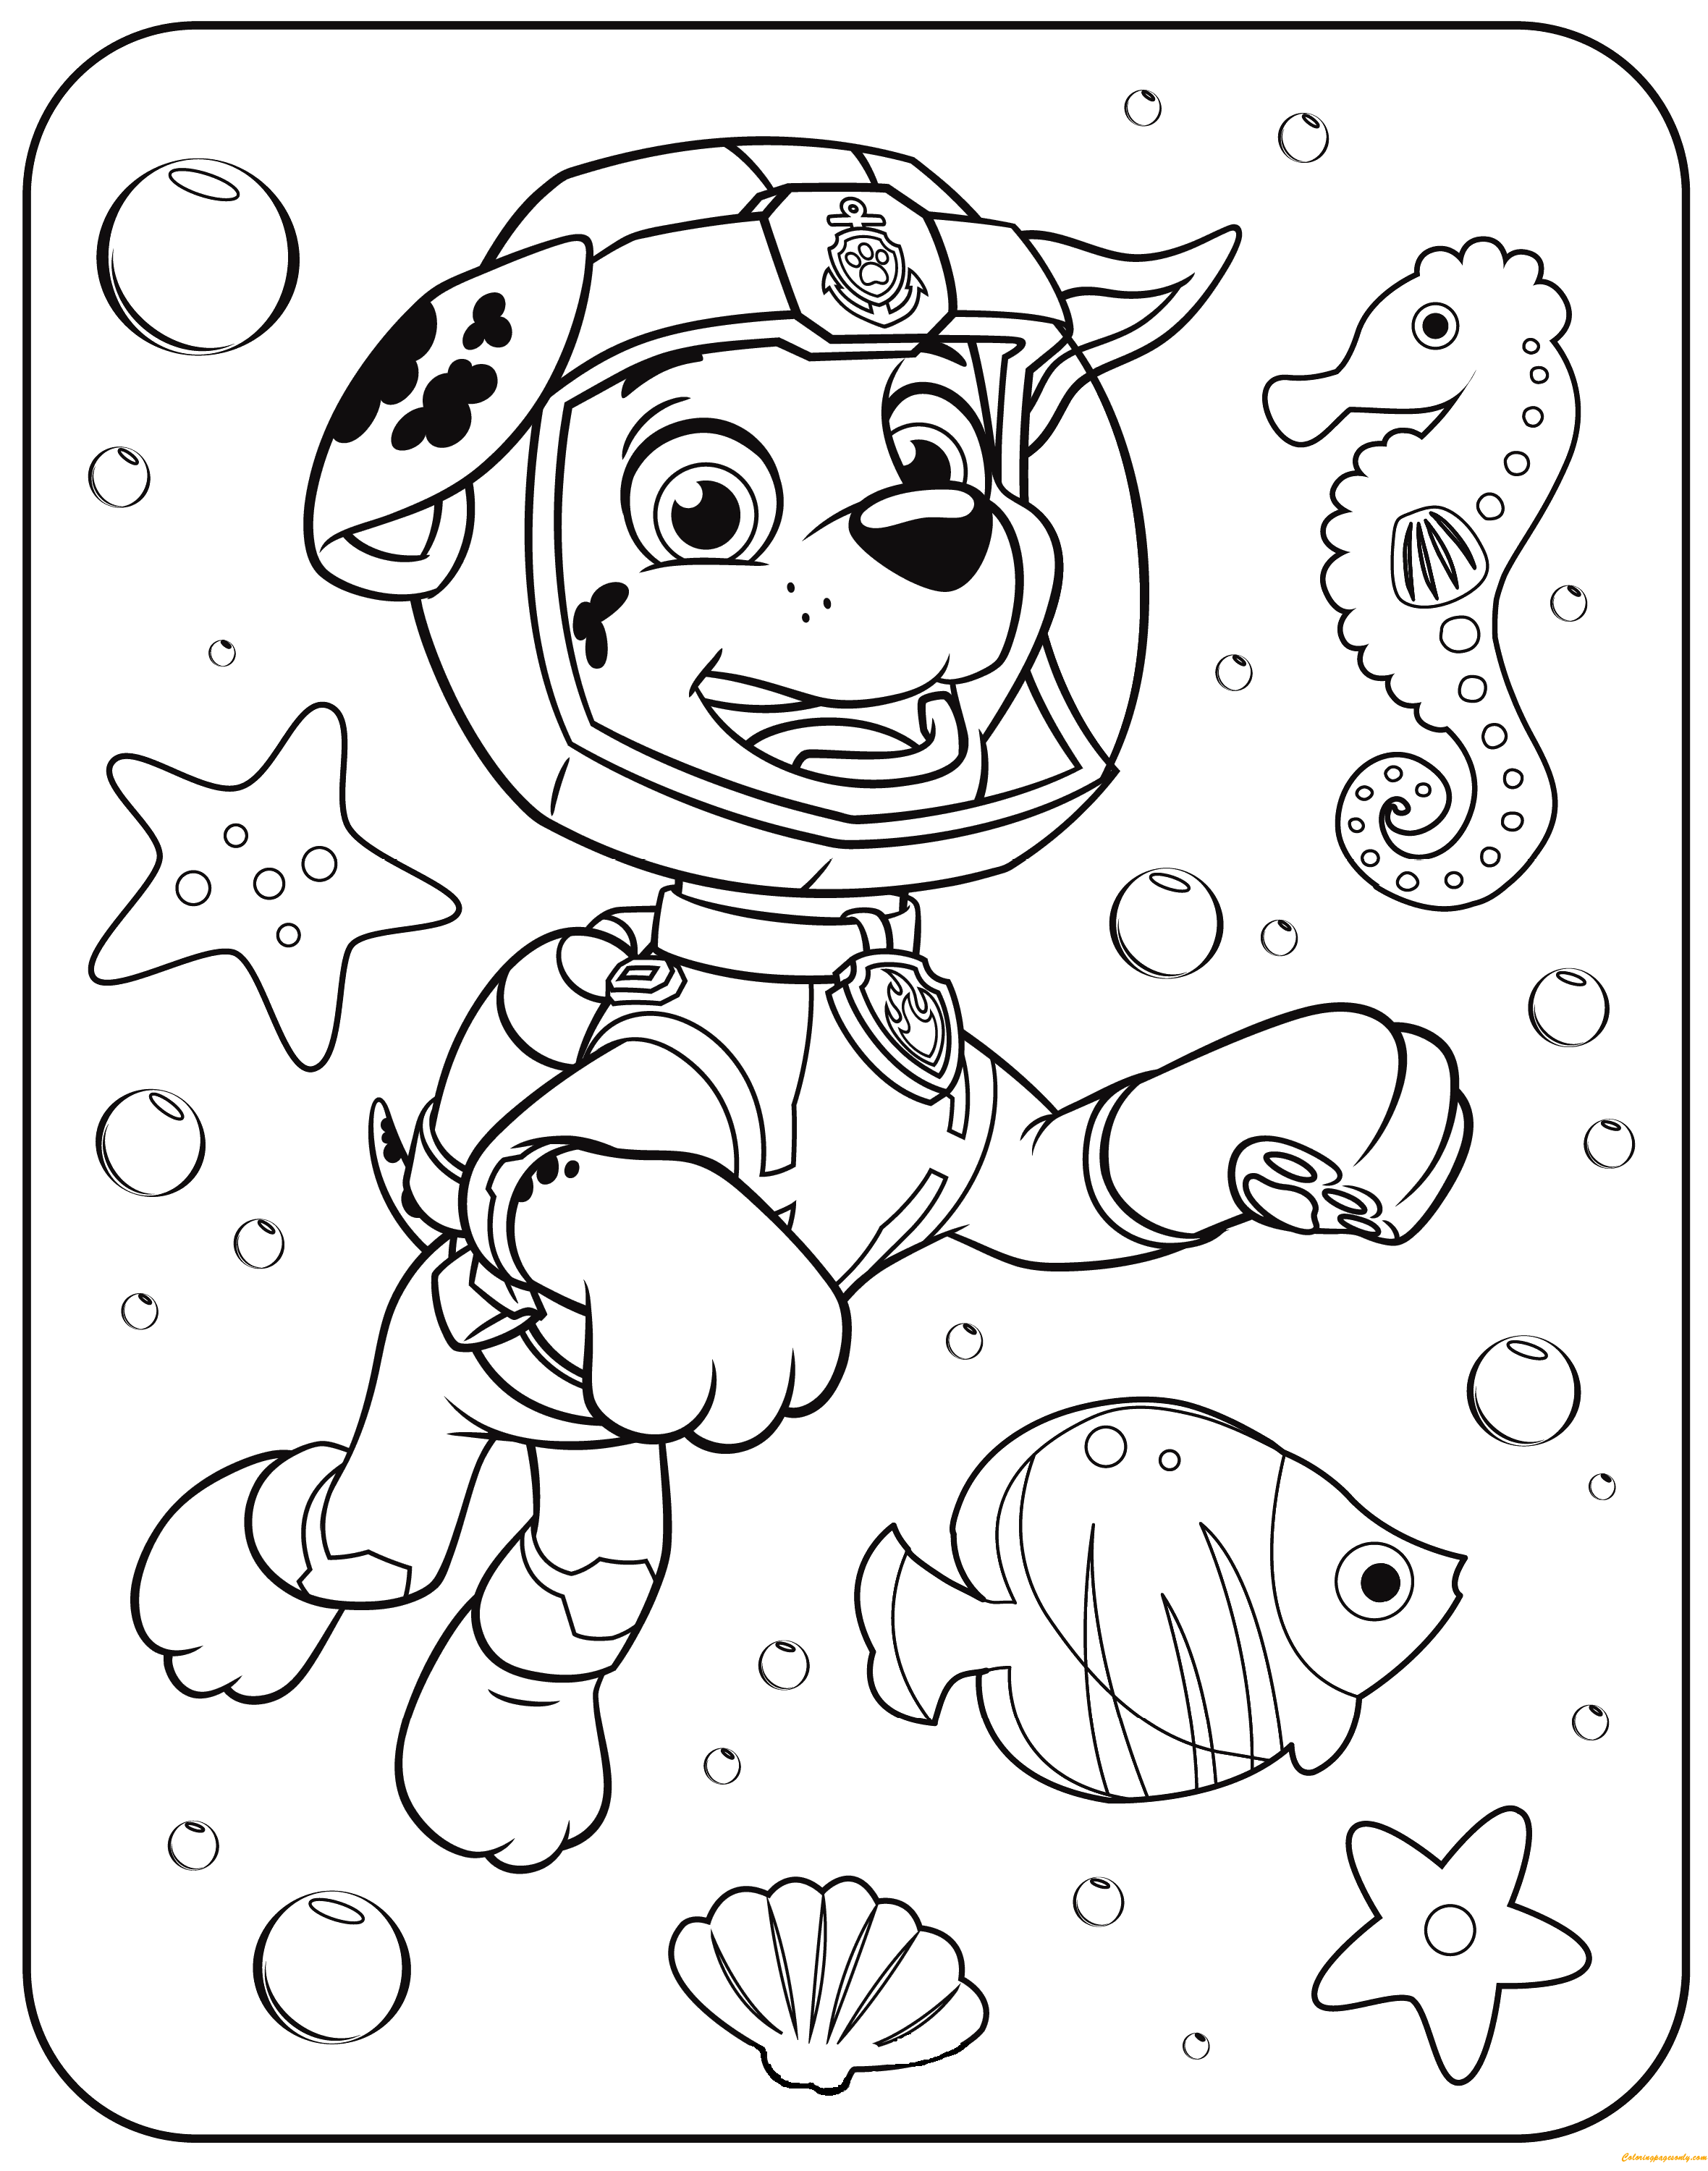 Paw Patrol Coloring Pages FREE Printable 149